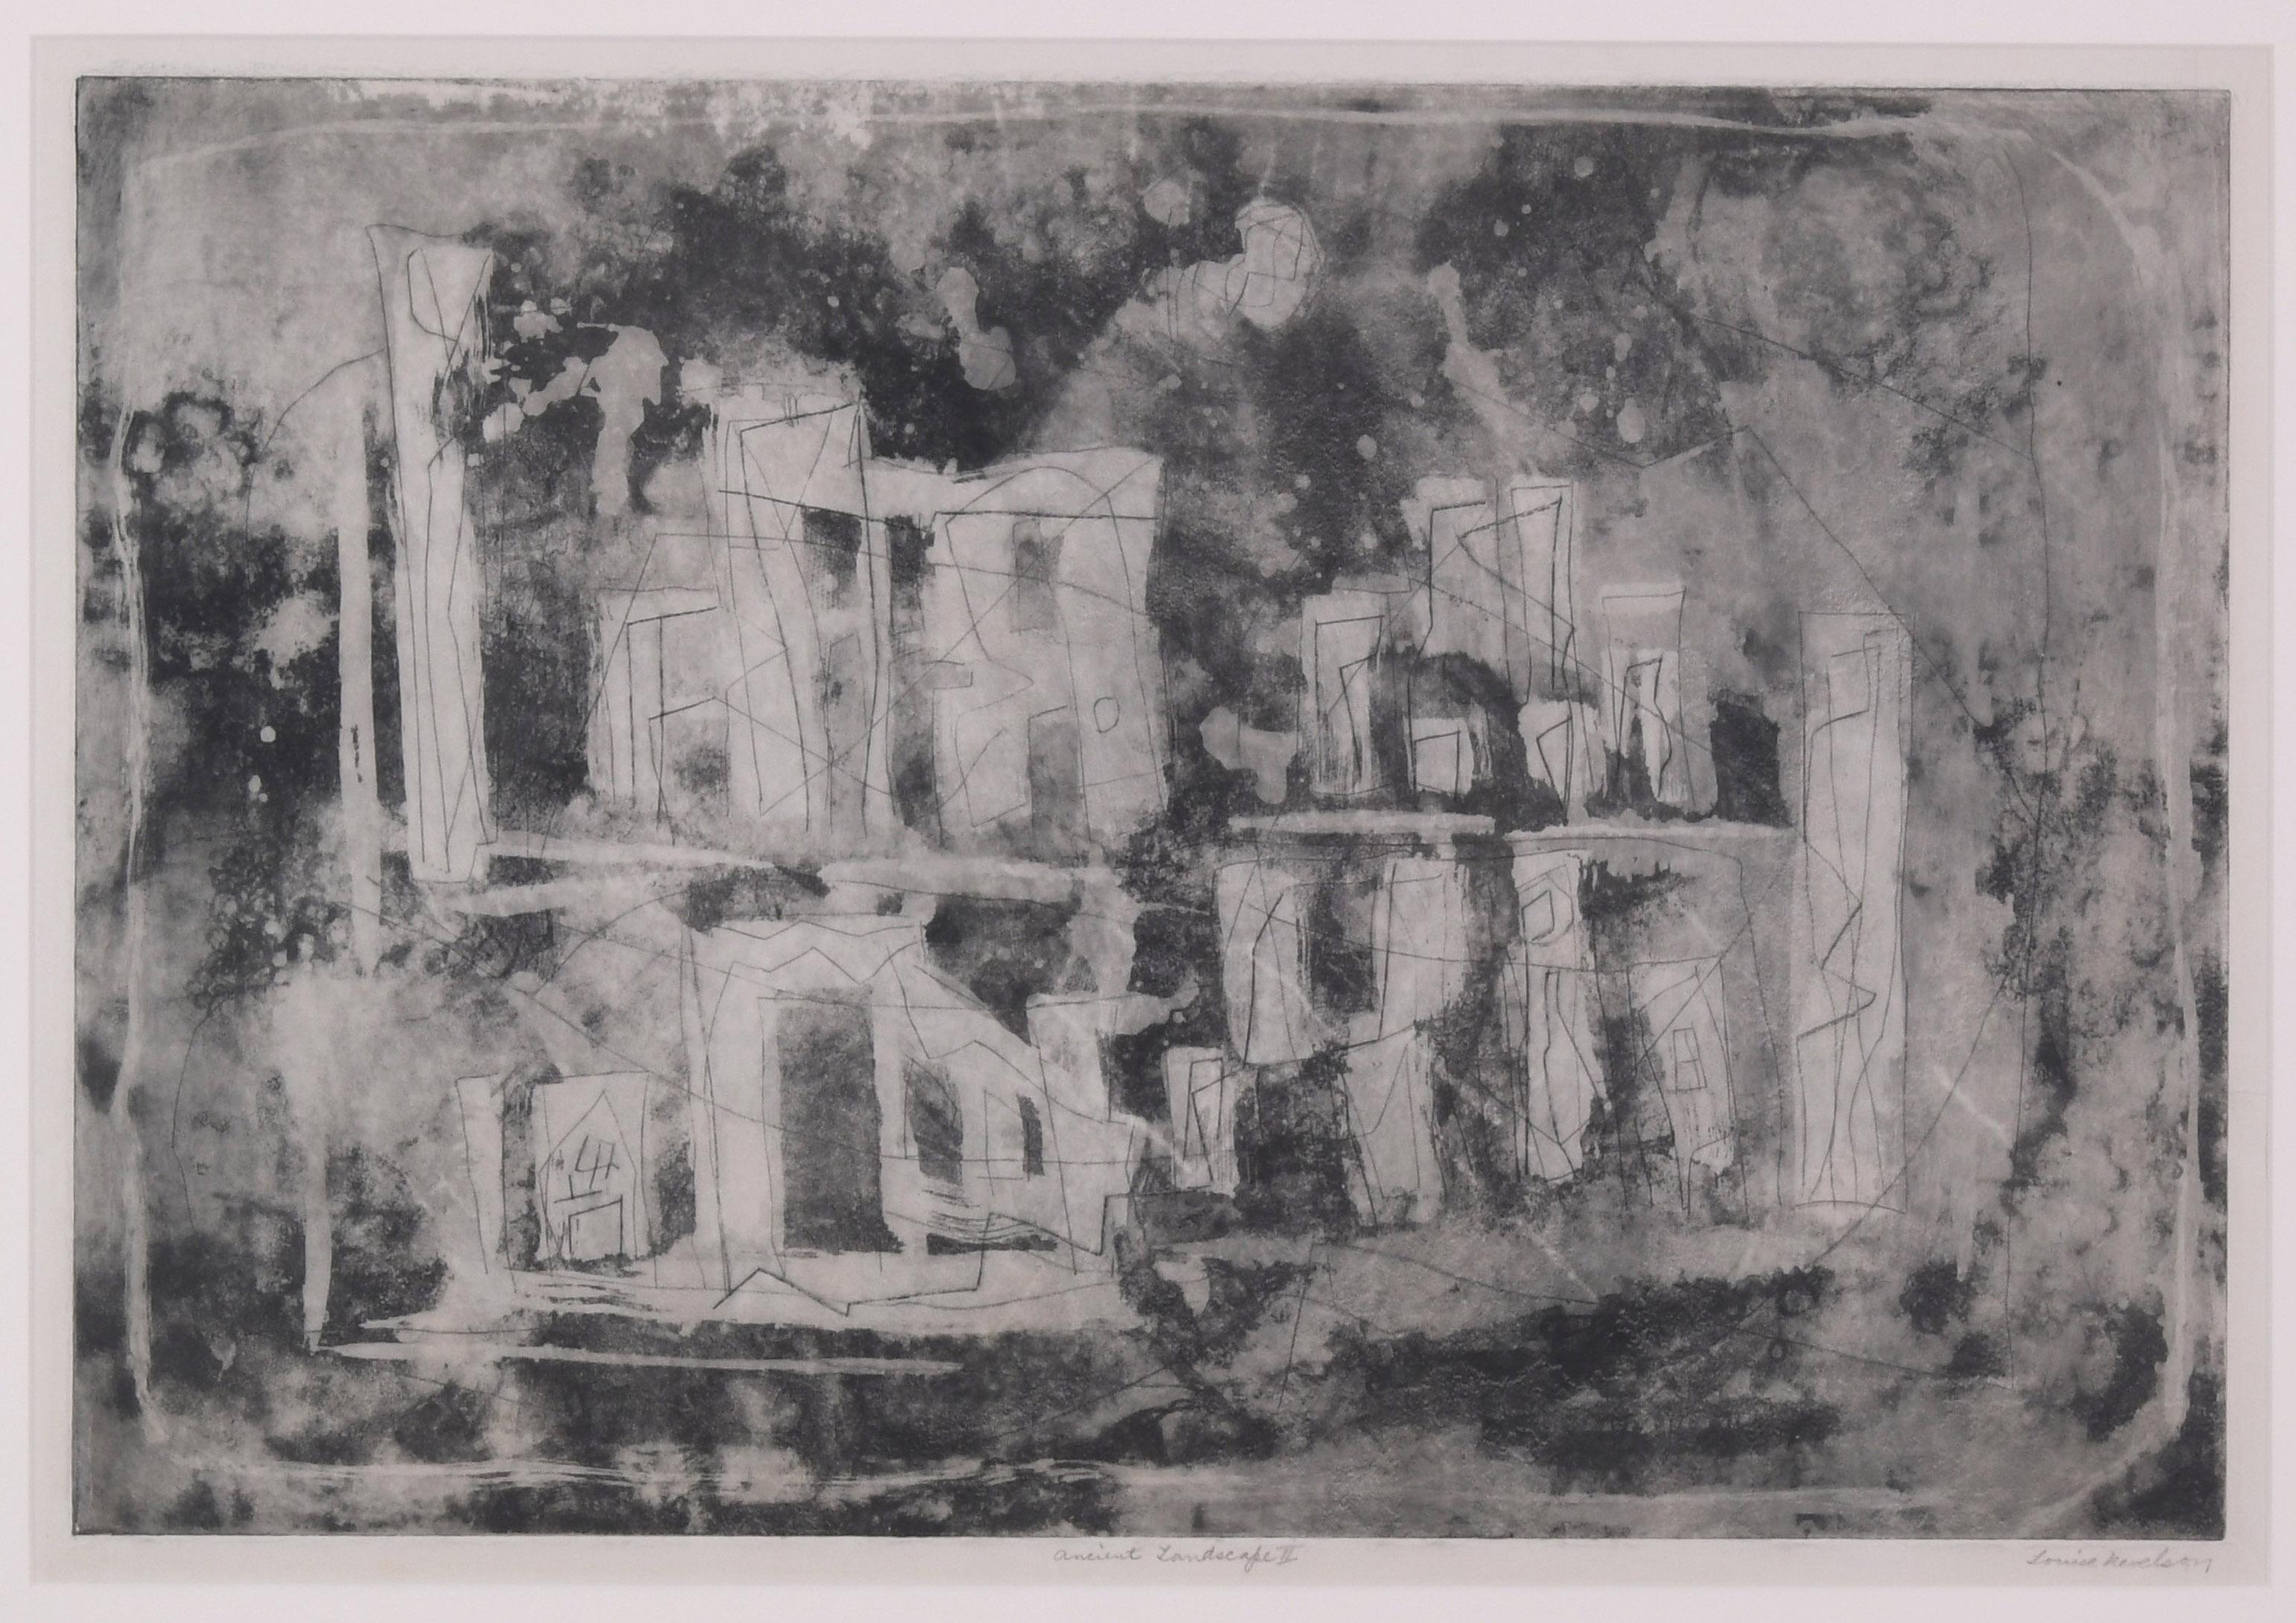 Abstract Print Louise Nevelson - Paysage ancien II (Ville ancienne)